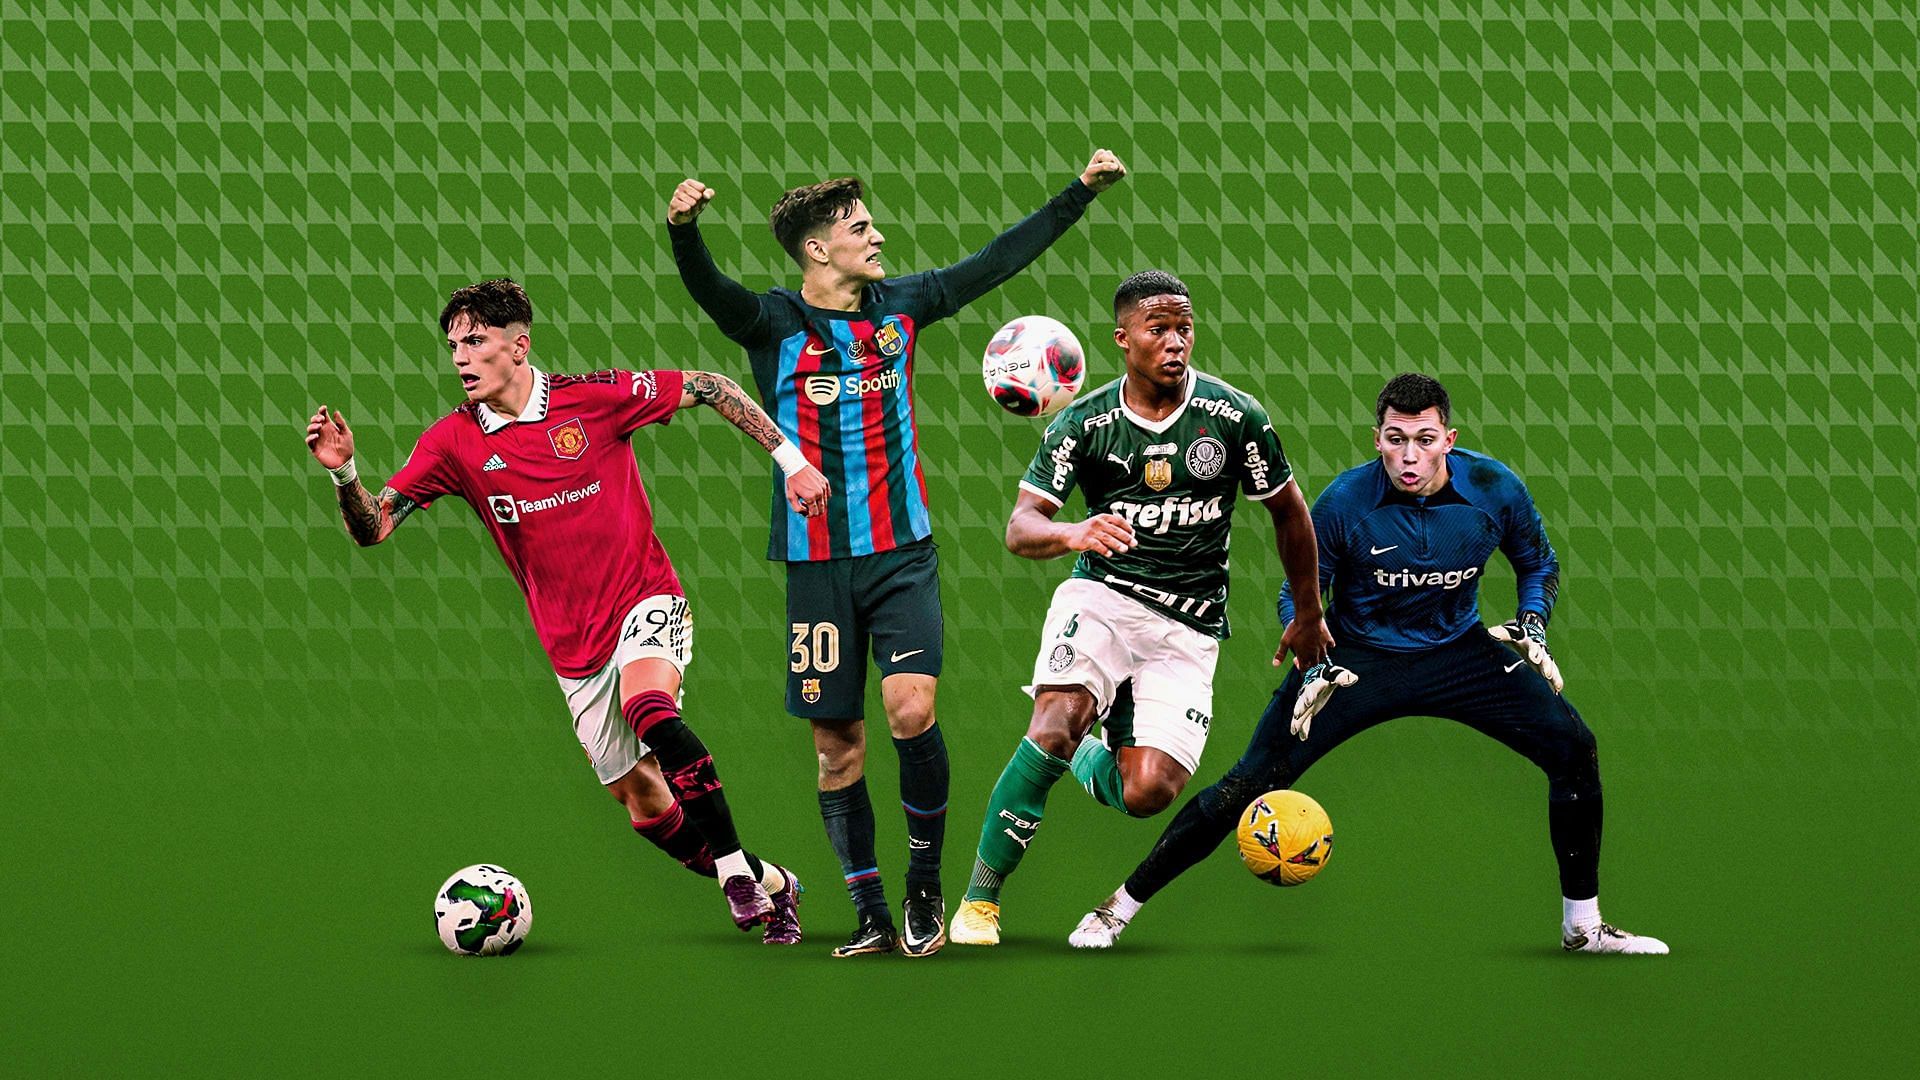 Rising Stars or One-Season Wonders? Assessing the Hype Around Young Talents in Football